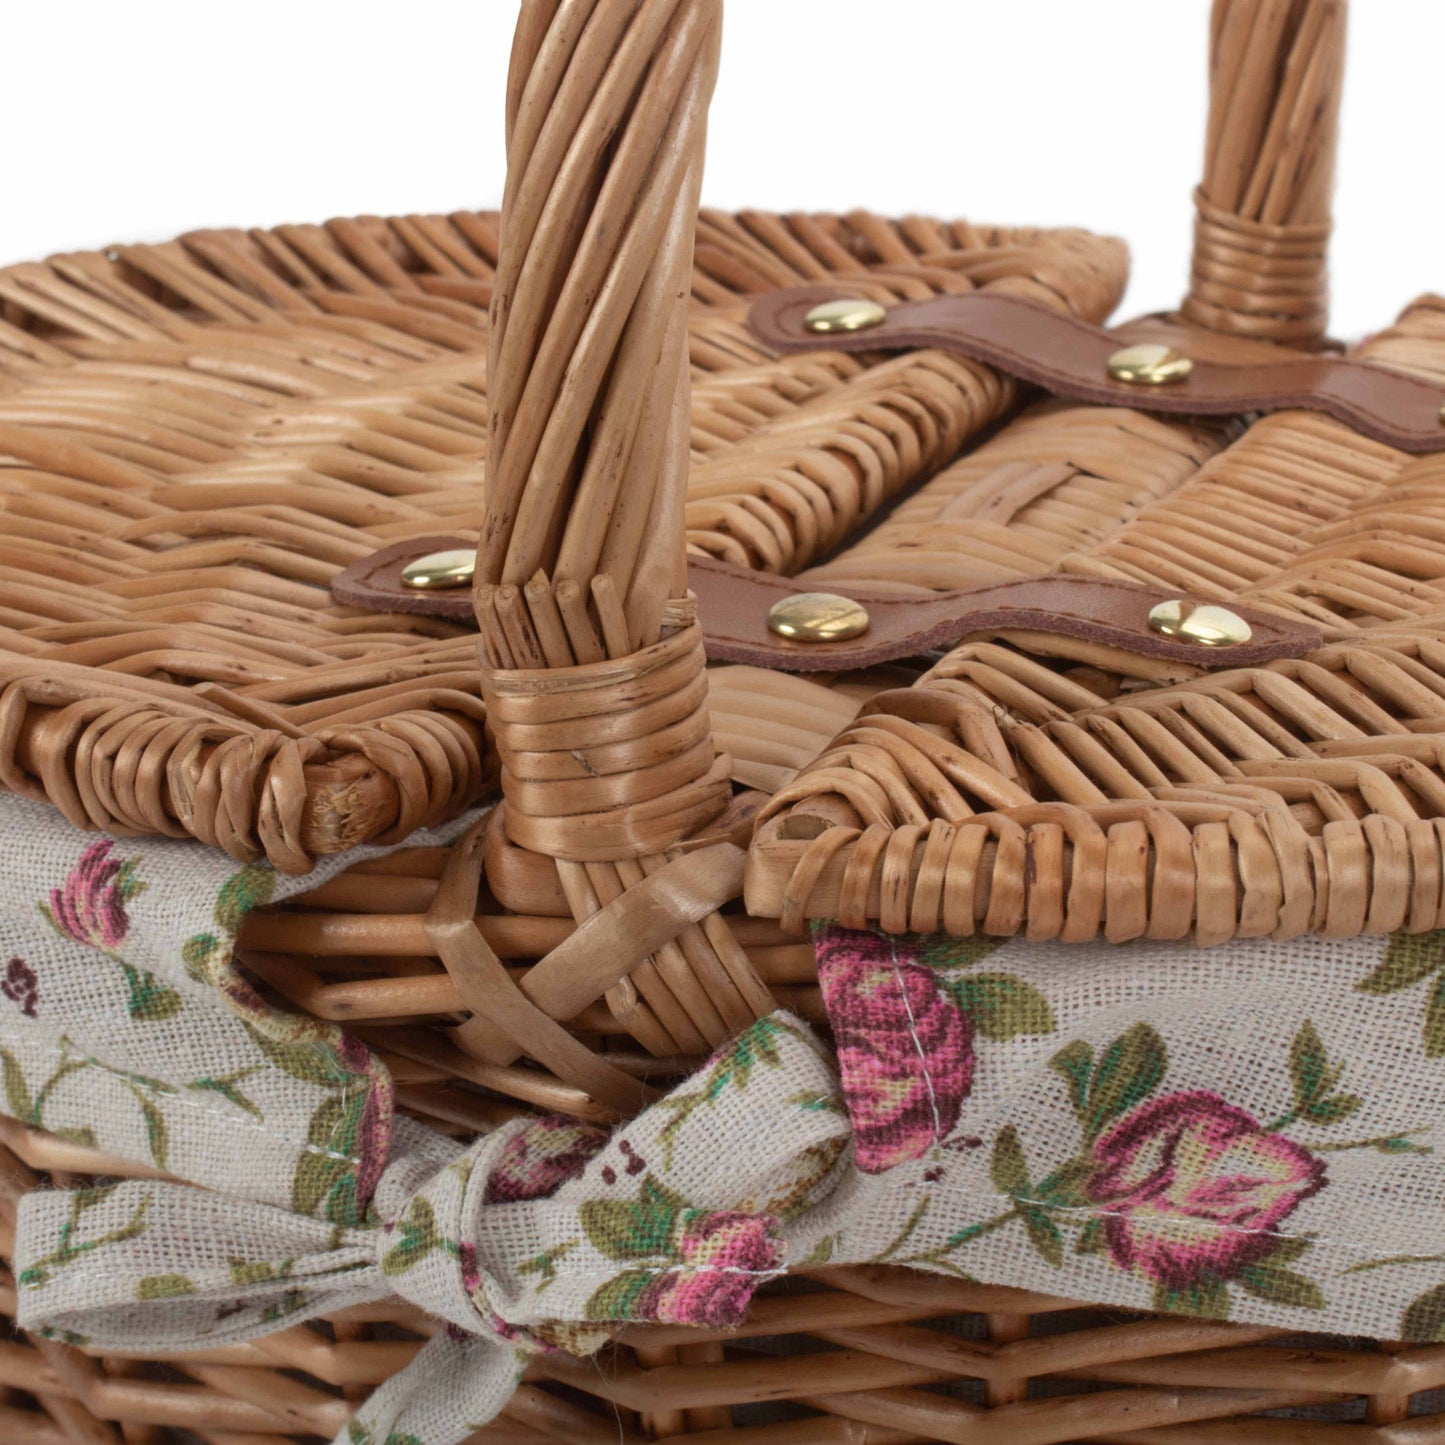 Child's Light Steamed Finish Oval Picnic Basket With Garden Rose Lining